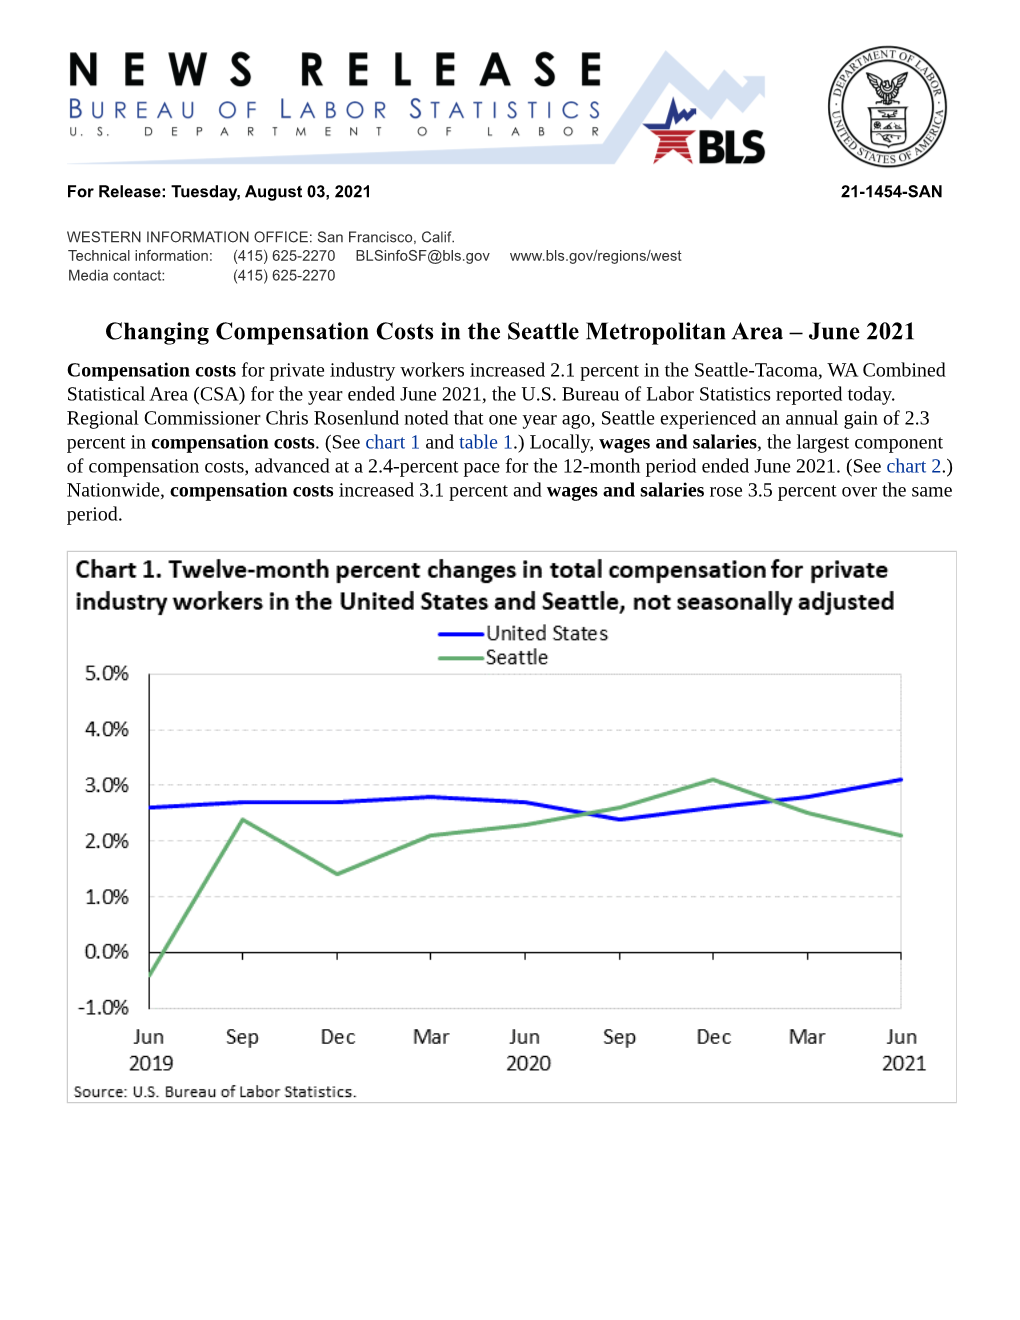 Changing Compensation Costs in the Seattle Metropolitan Area – June